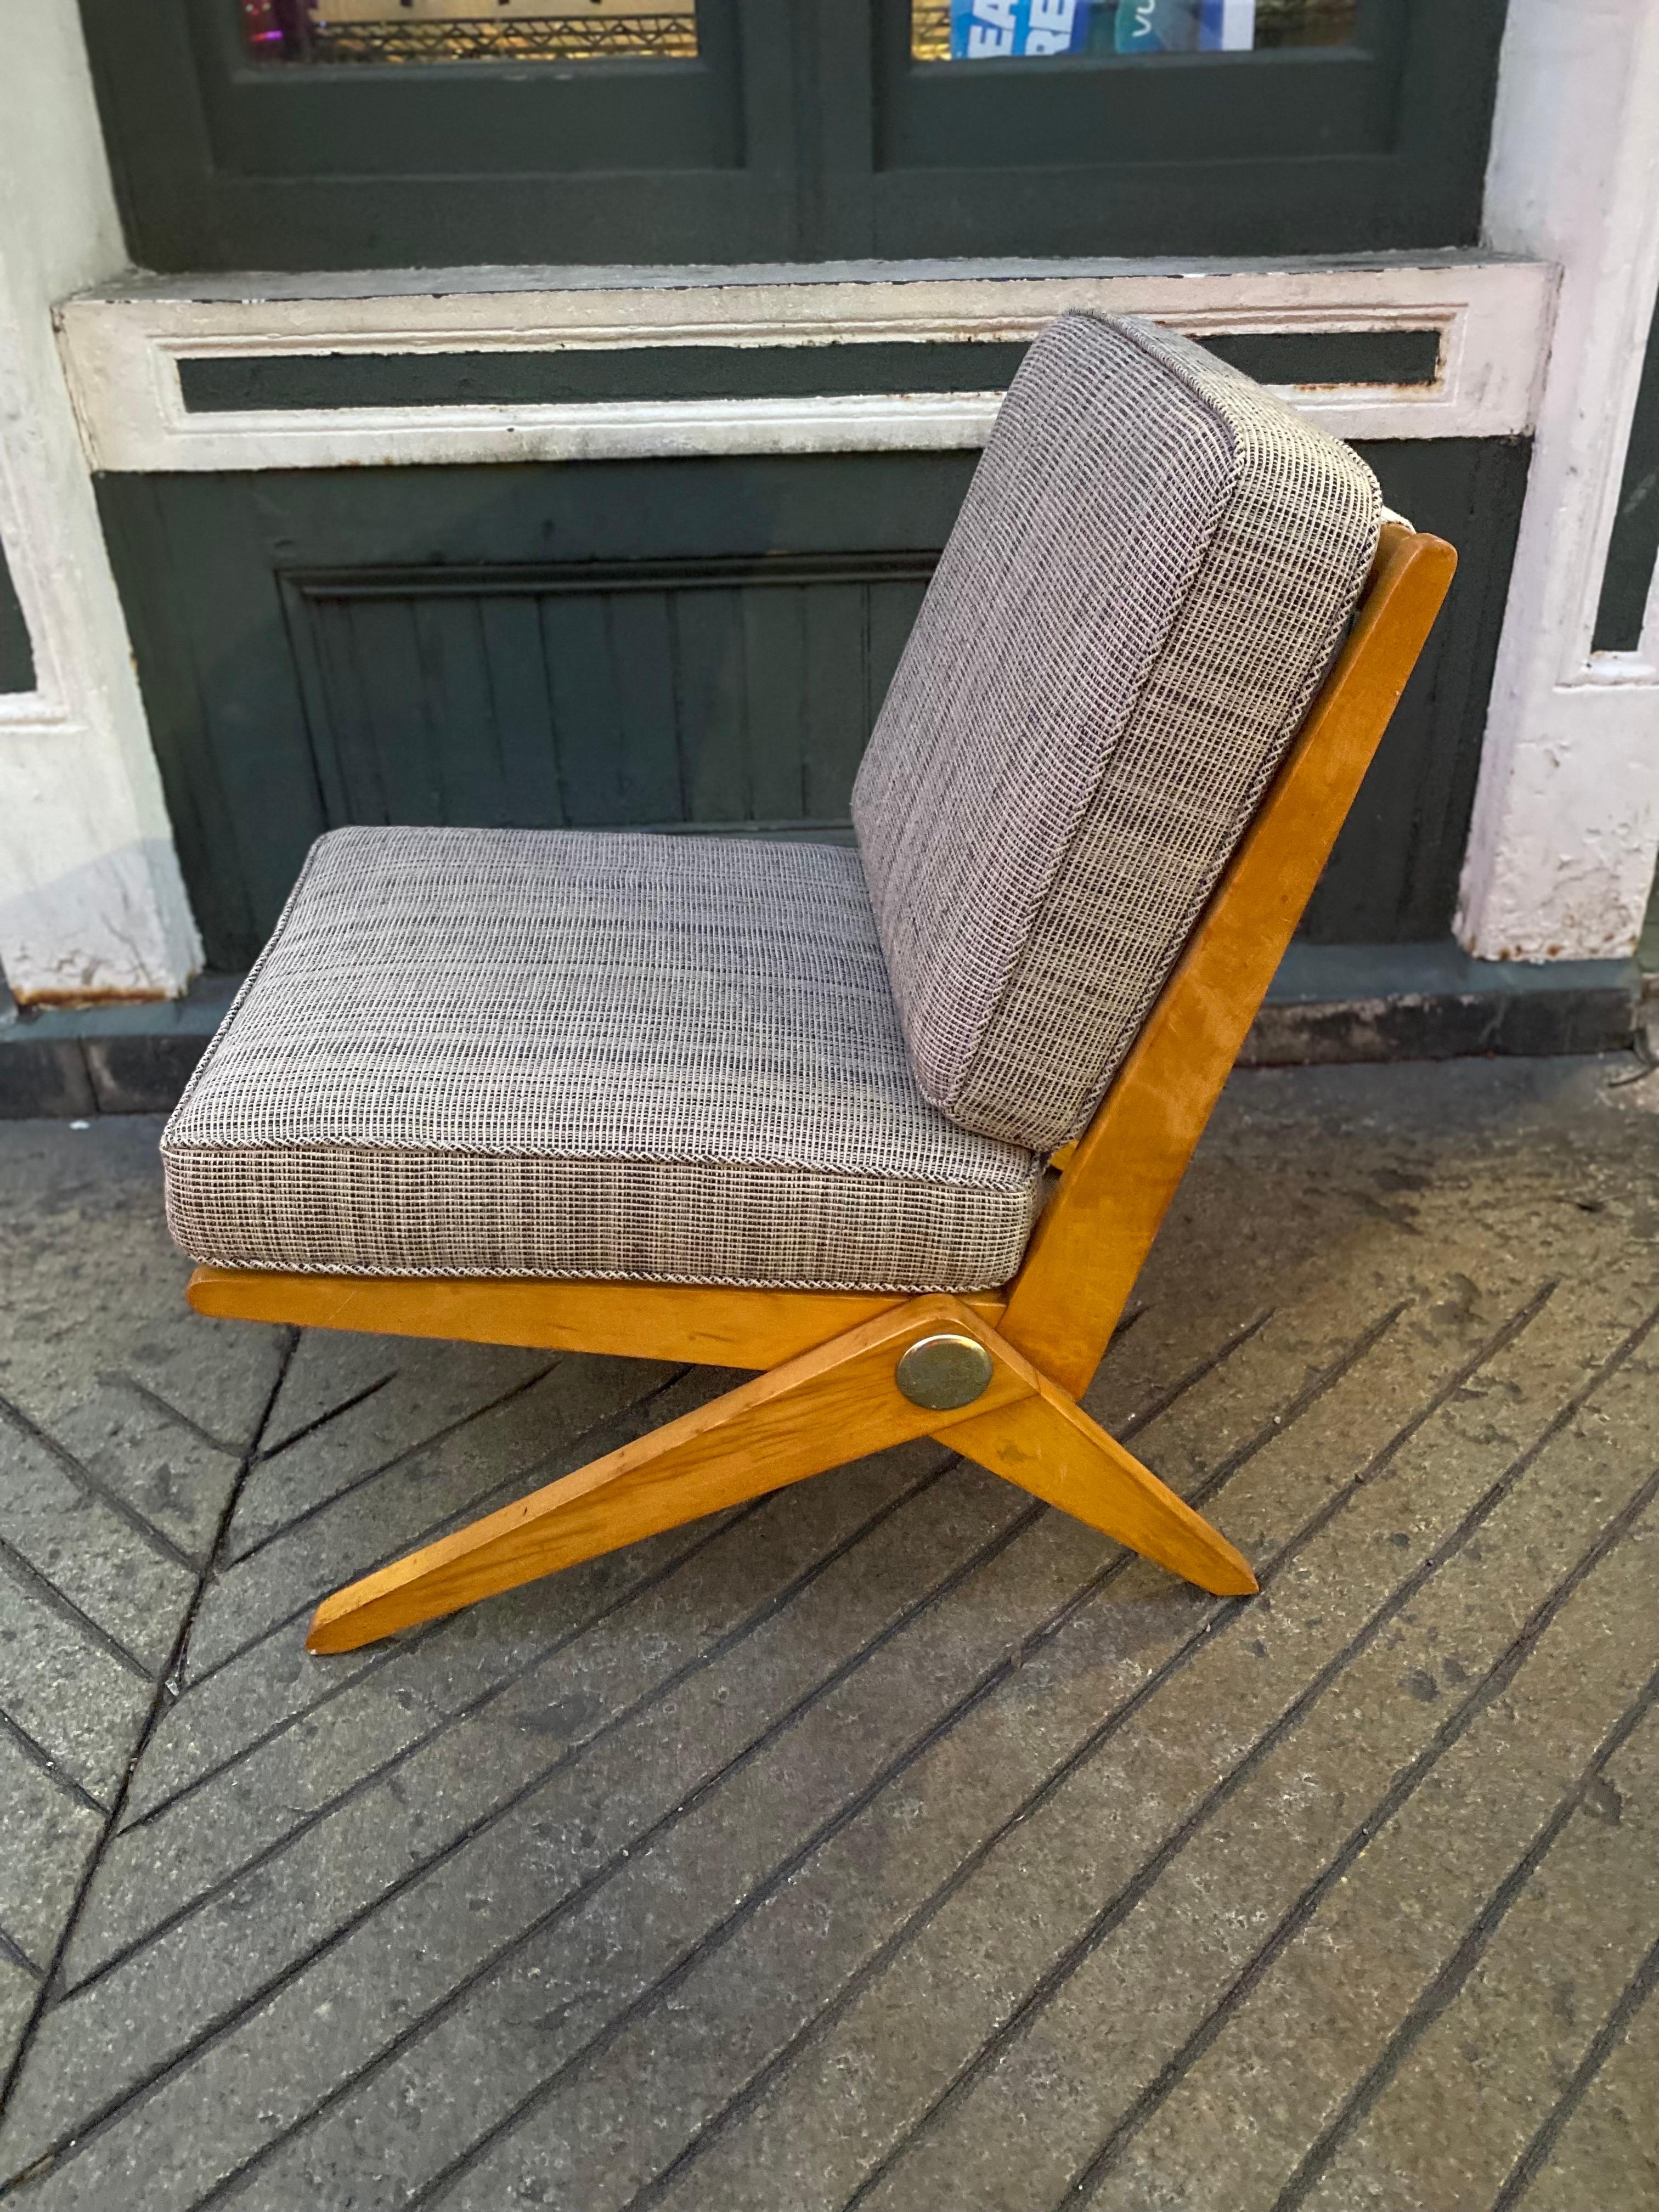 Pierre Jeanneret Scissor chair for Knoll. Very Nice Example! Original finish on the Maple frame. Newly upholstered Cushions. Very sturdy and solid example! New correct webbing.